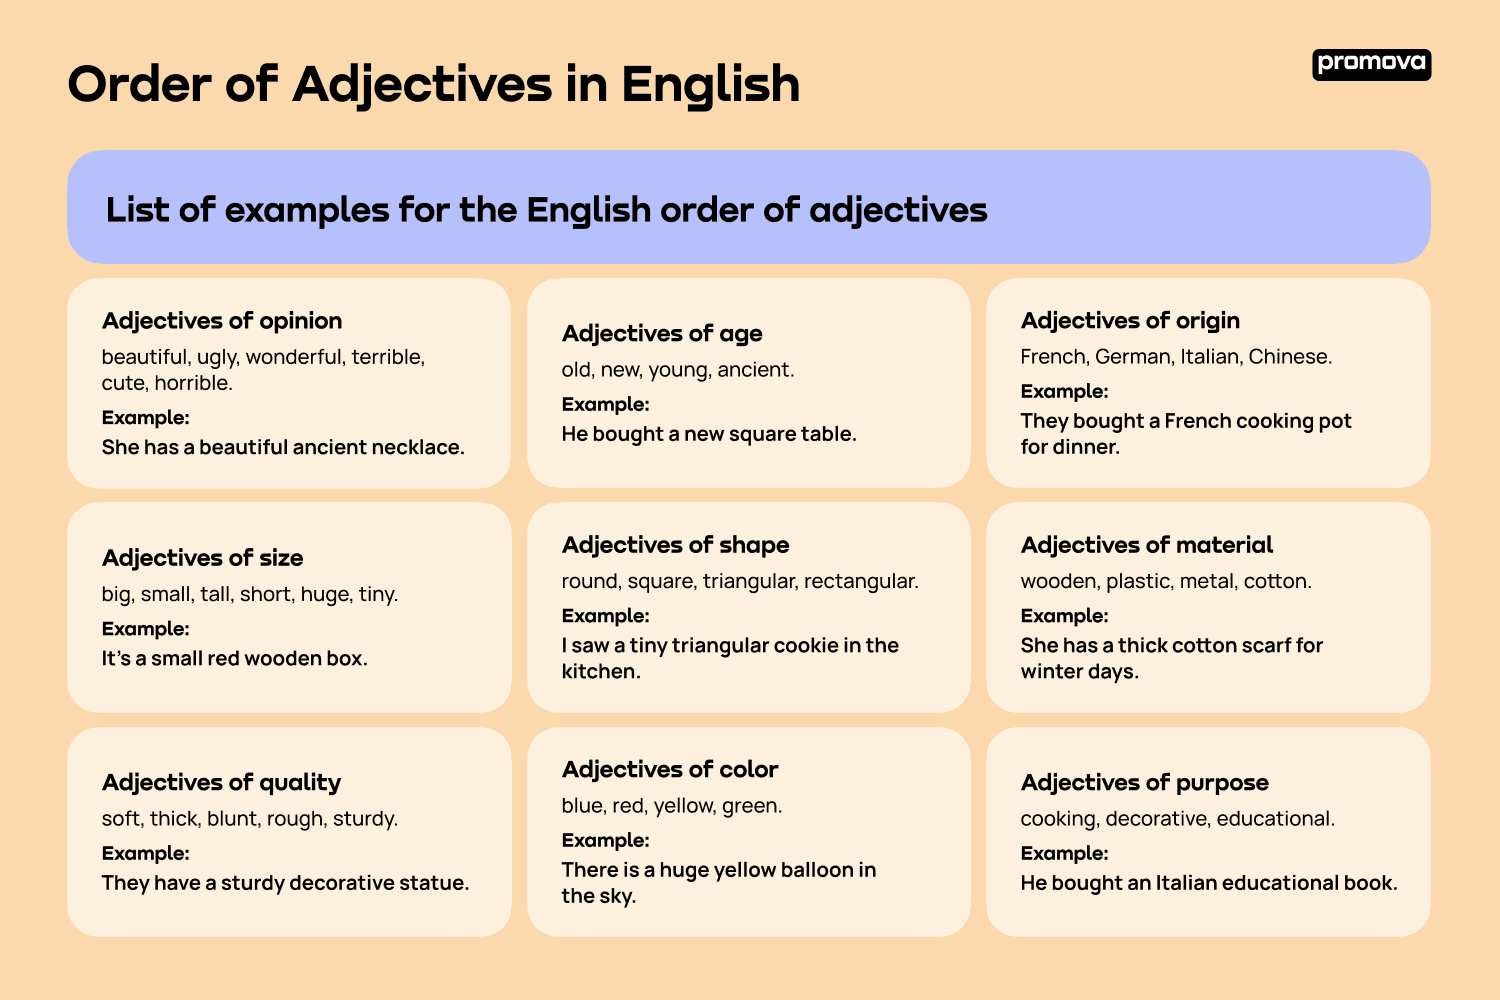 List of examples for the English order of adjectives